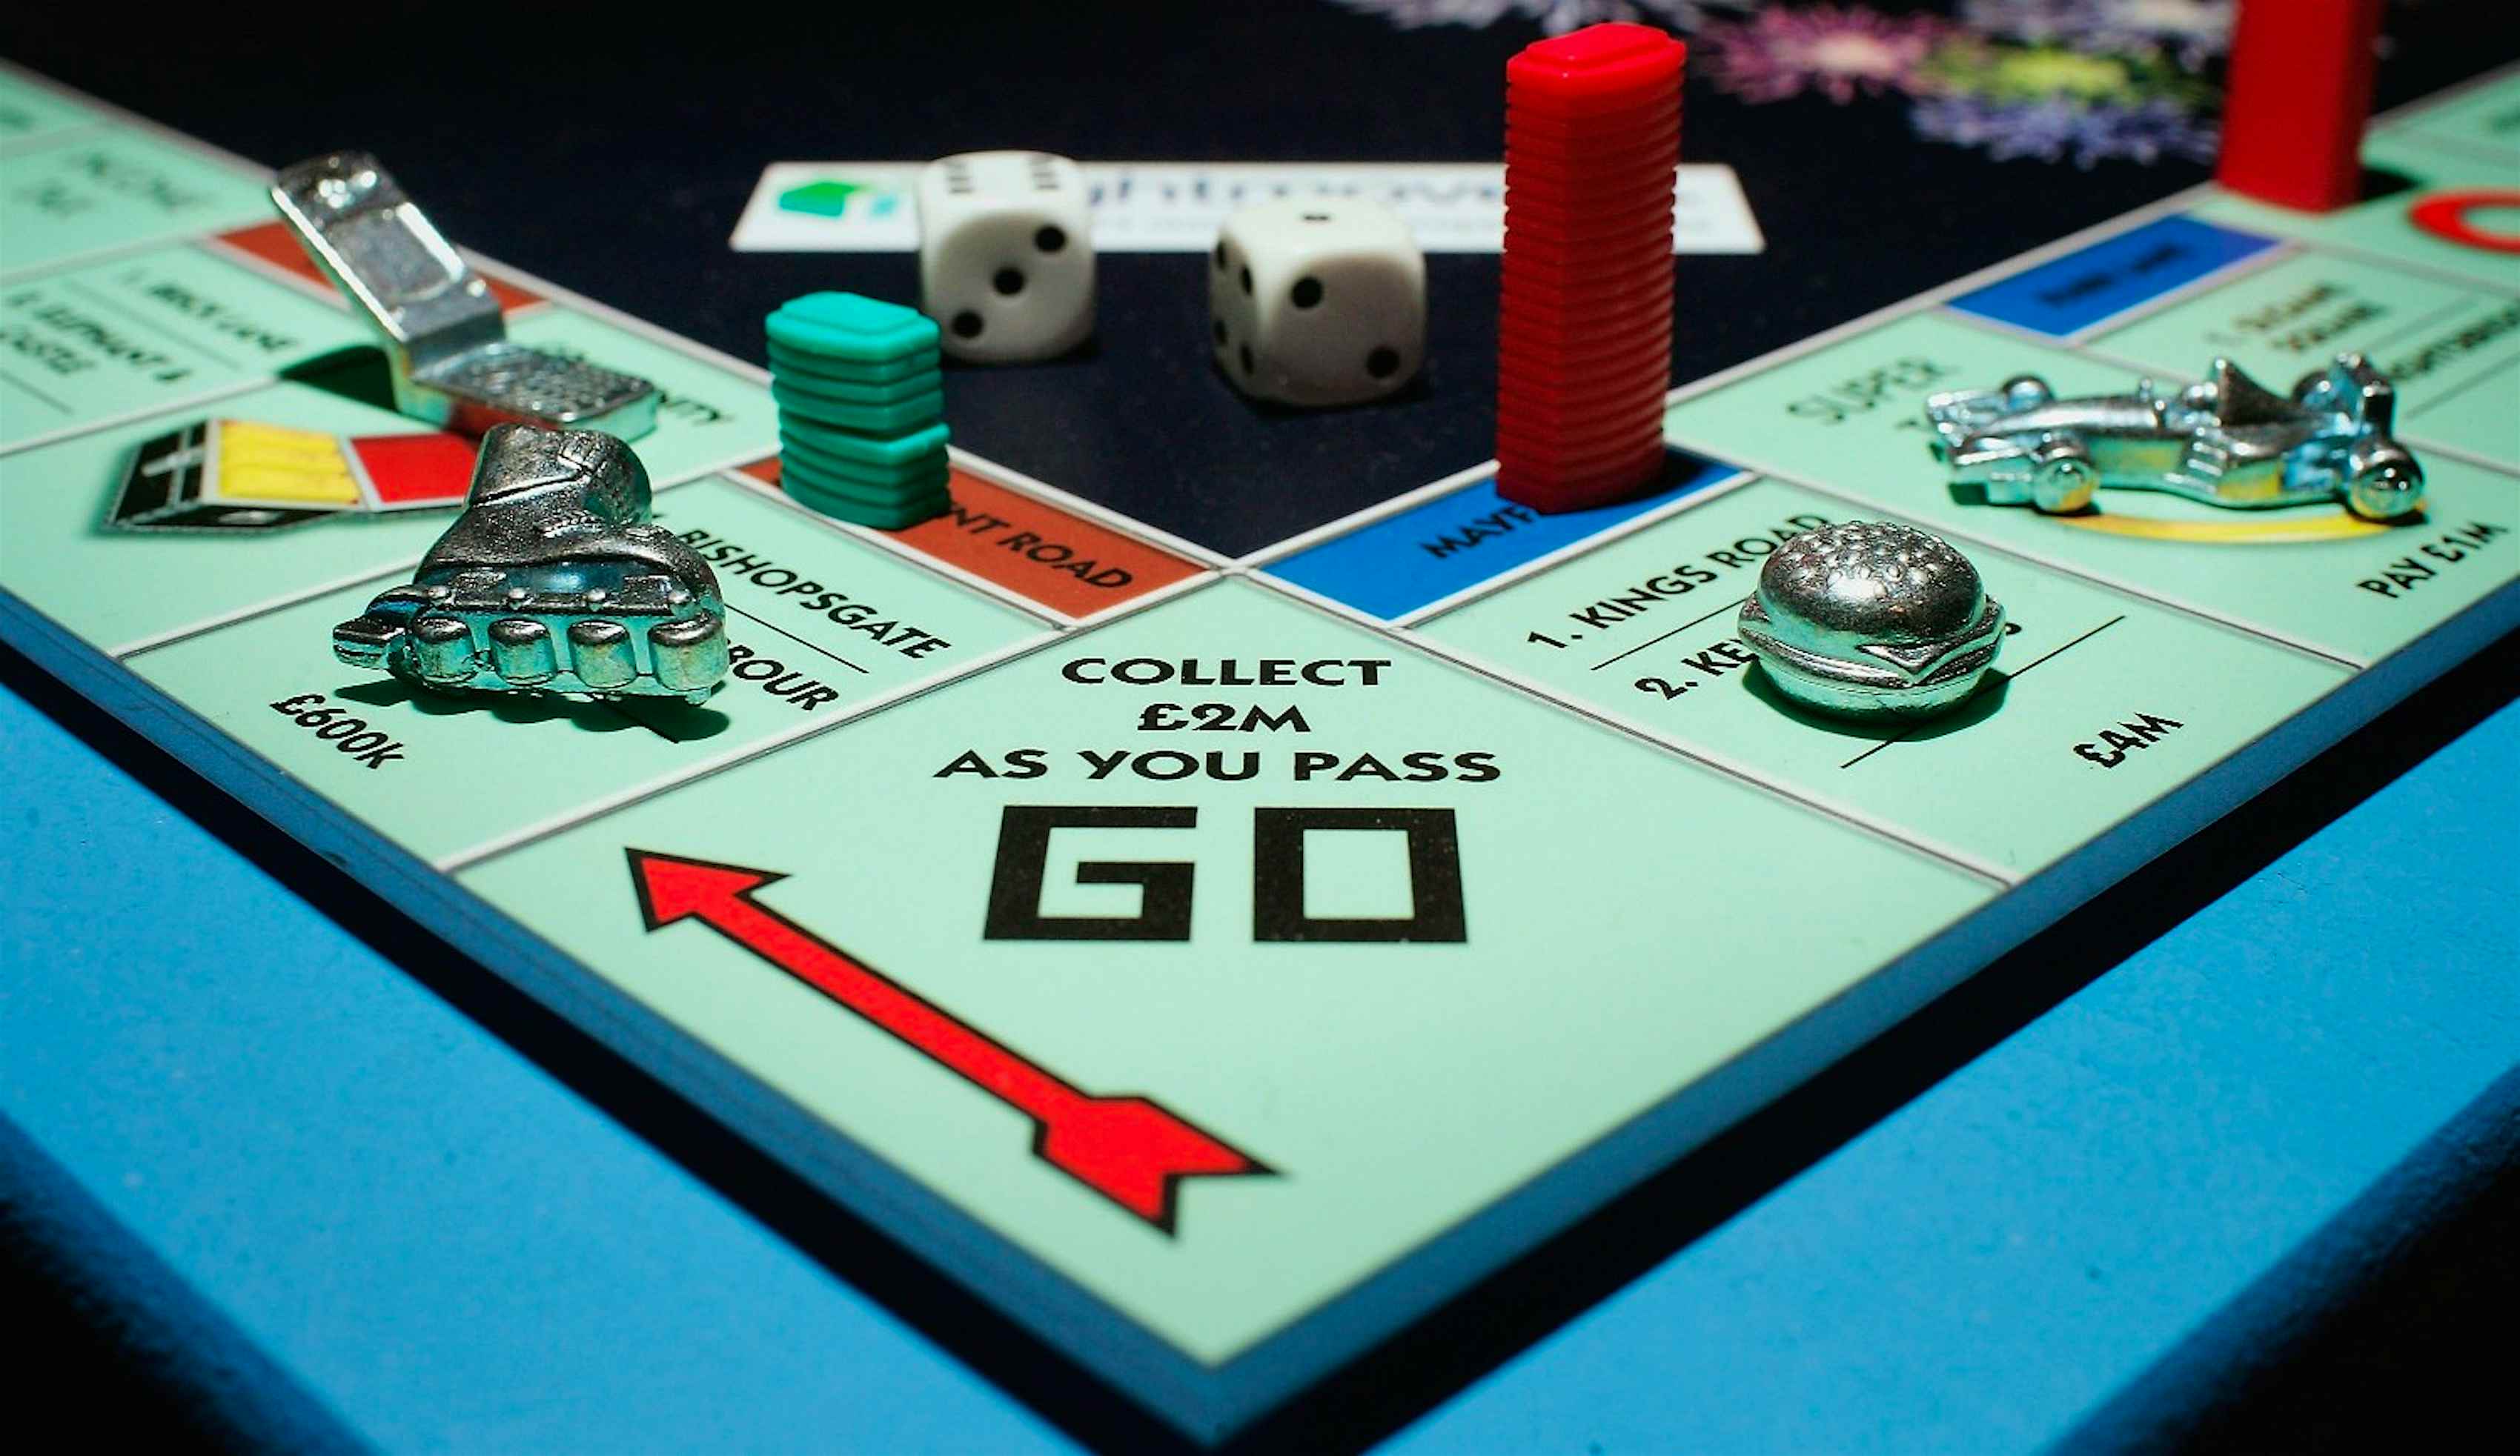 The world's first Monopoly hotel will open in Kuala Lumpur in 2019